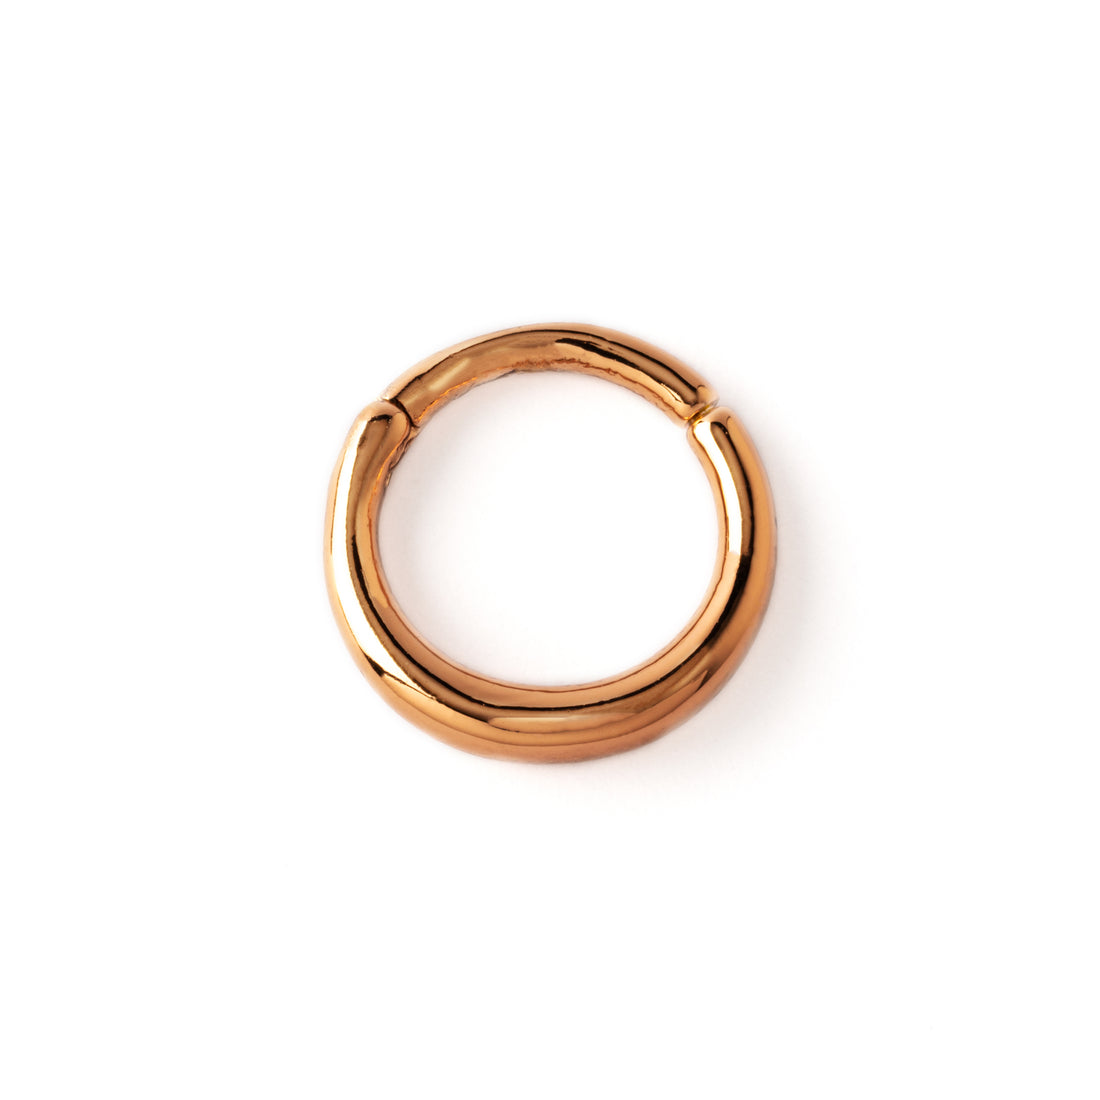 Raja rose gold surgical steel septum clicker ring frontal view